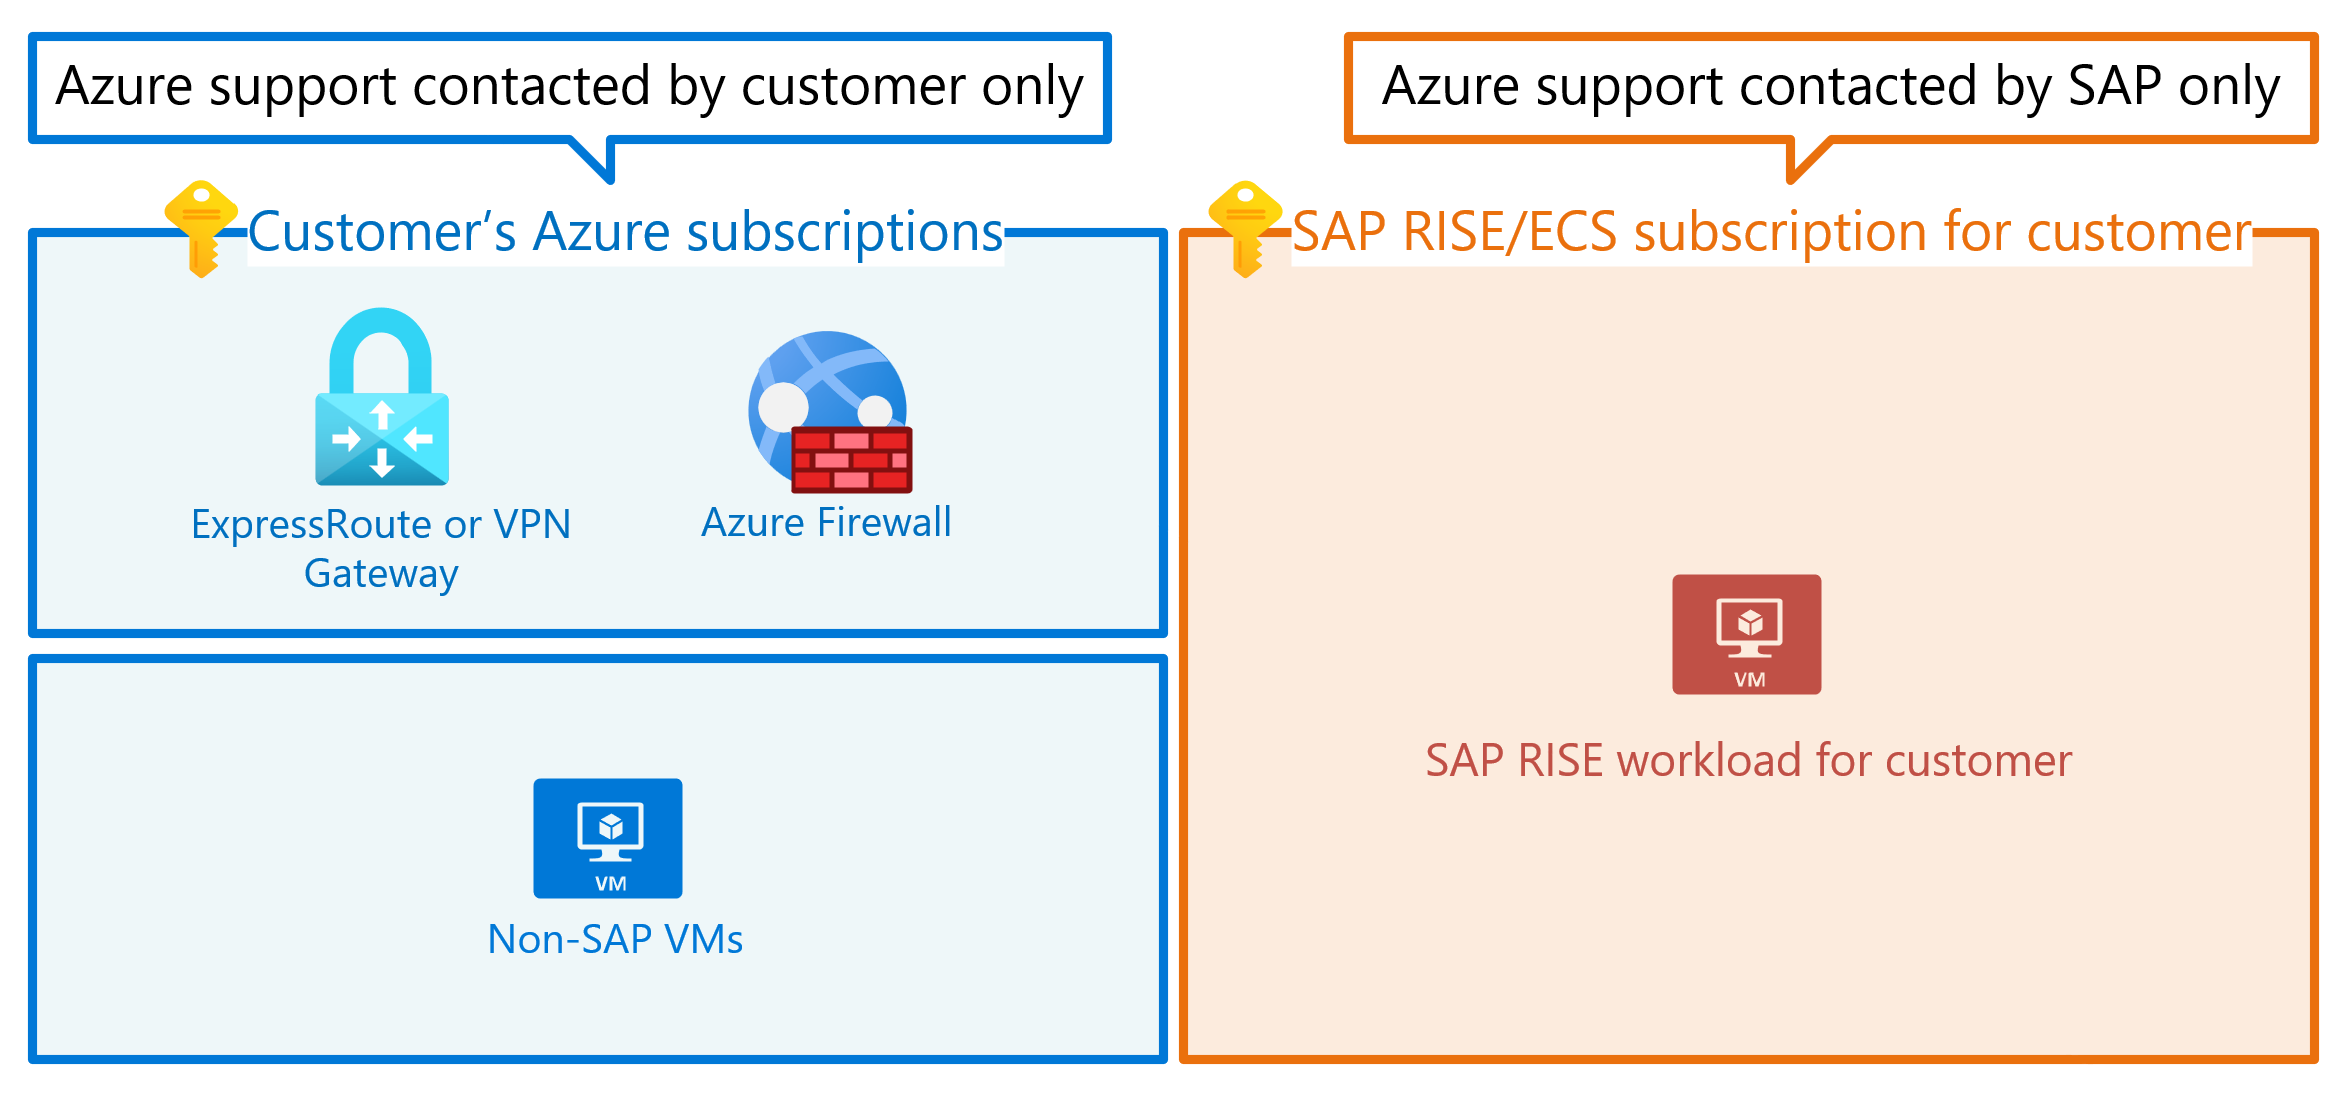 Diagram shows the separation of Azure support between SAP and customer's environments.